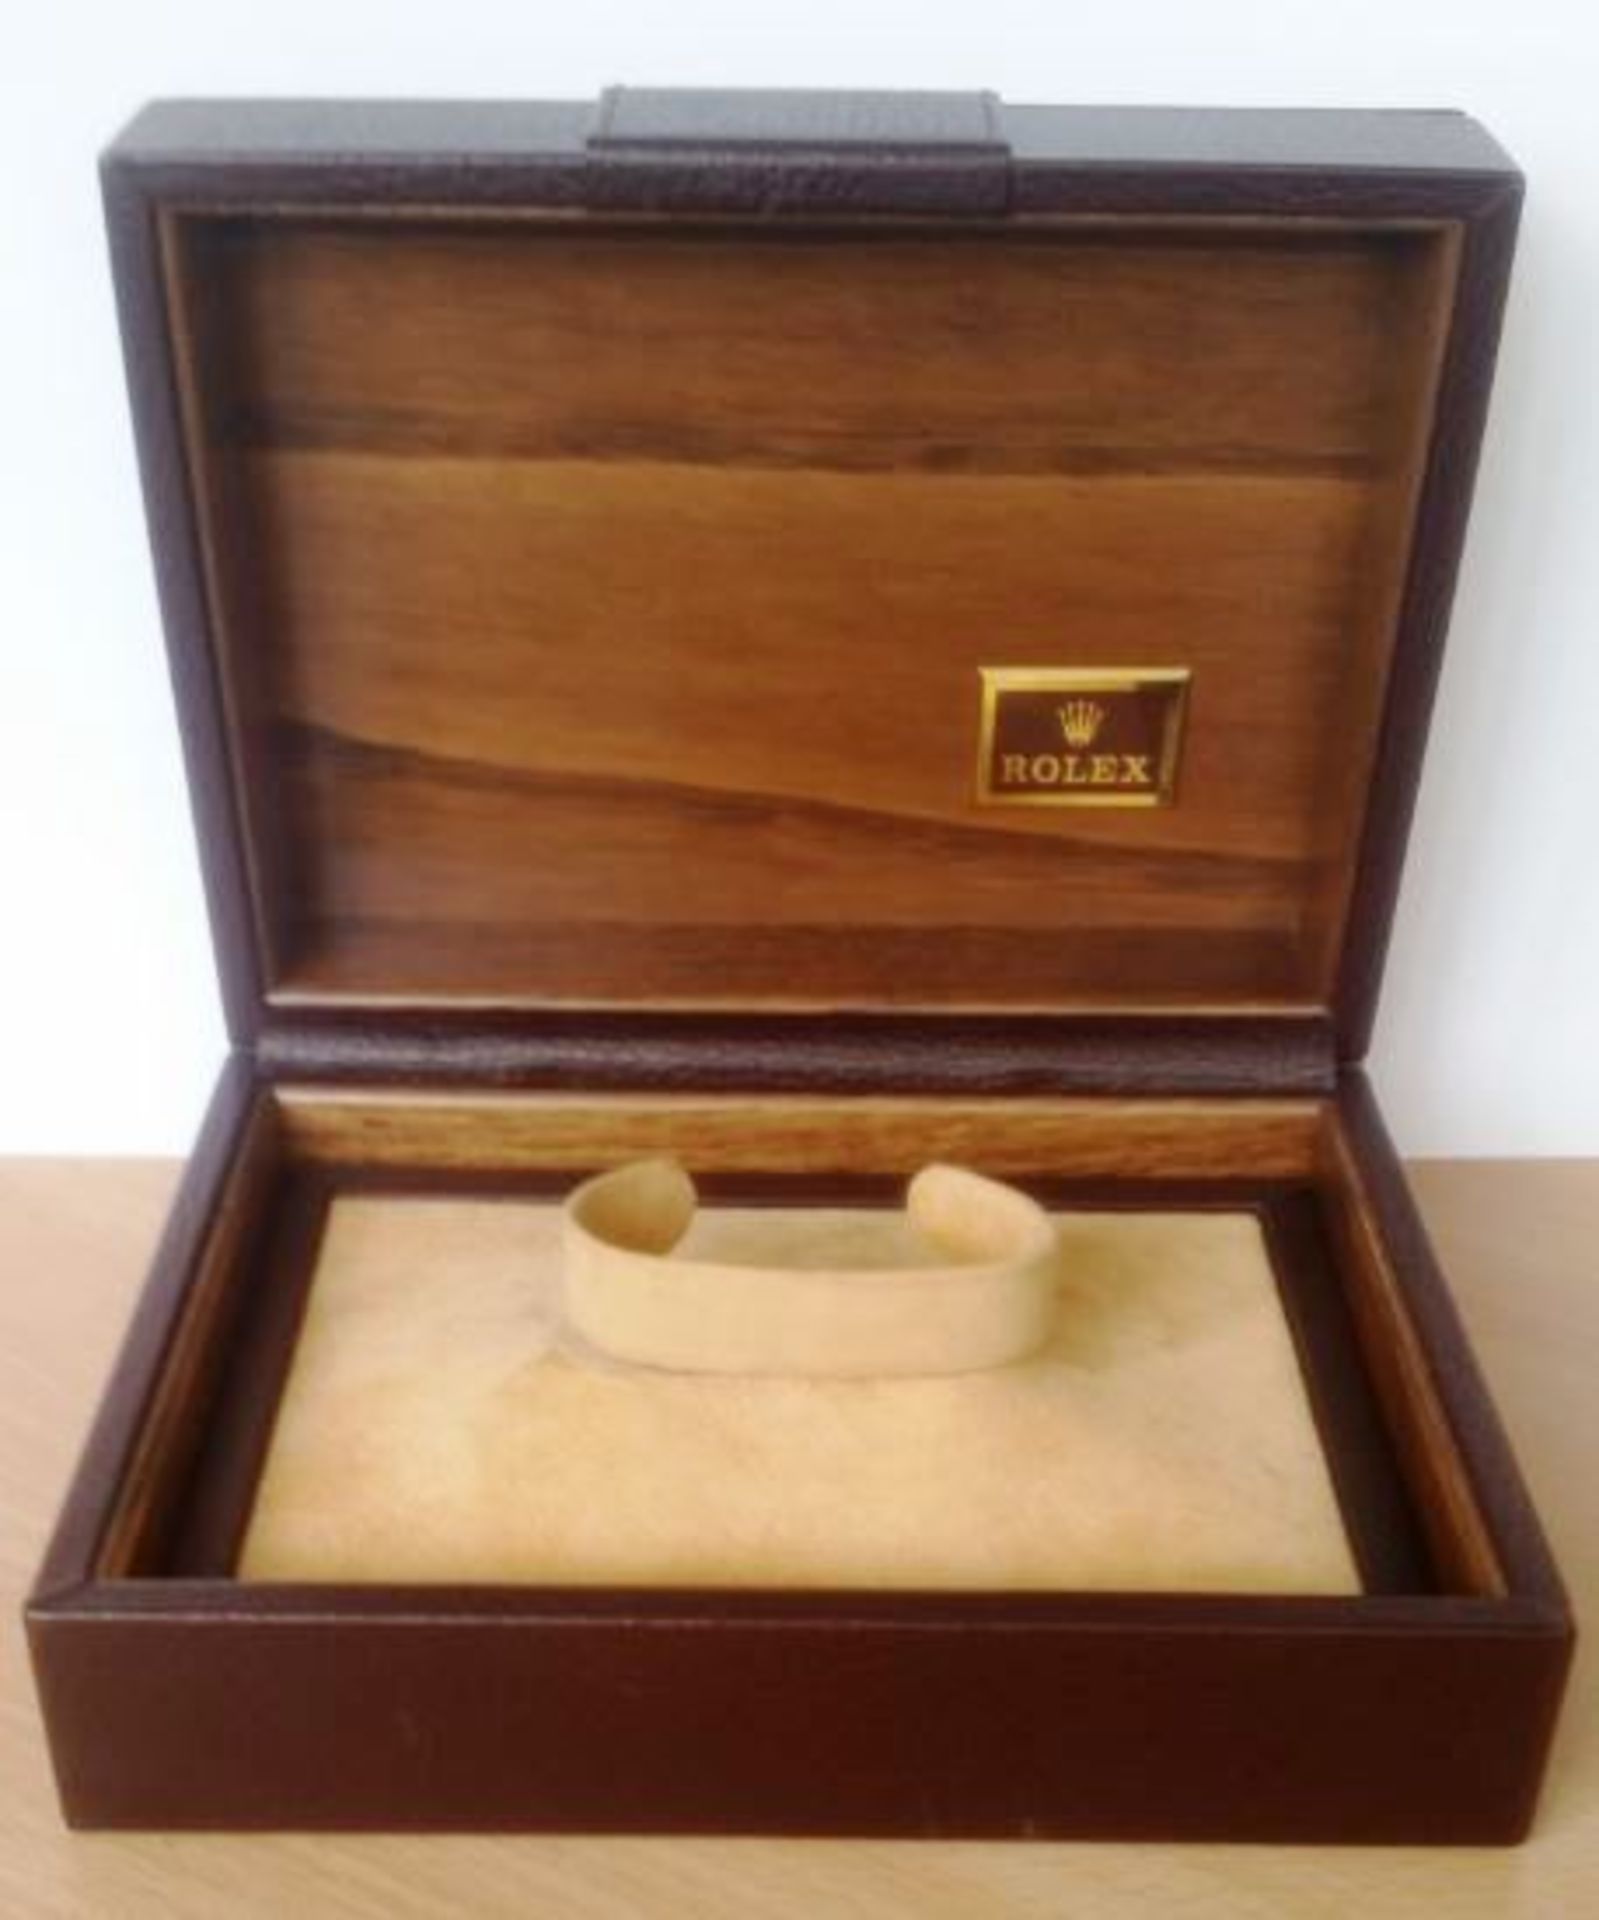 Rolex Brown Leather Presentation Watch Box - Image 2 of 4